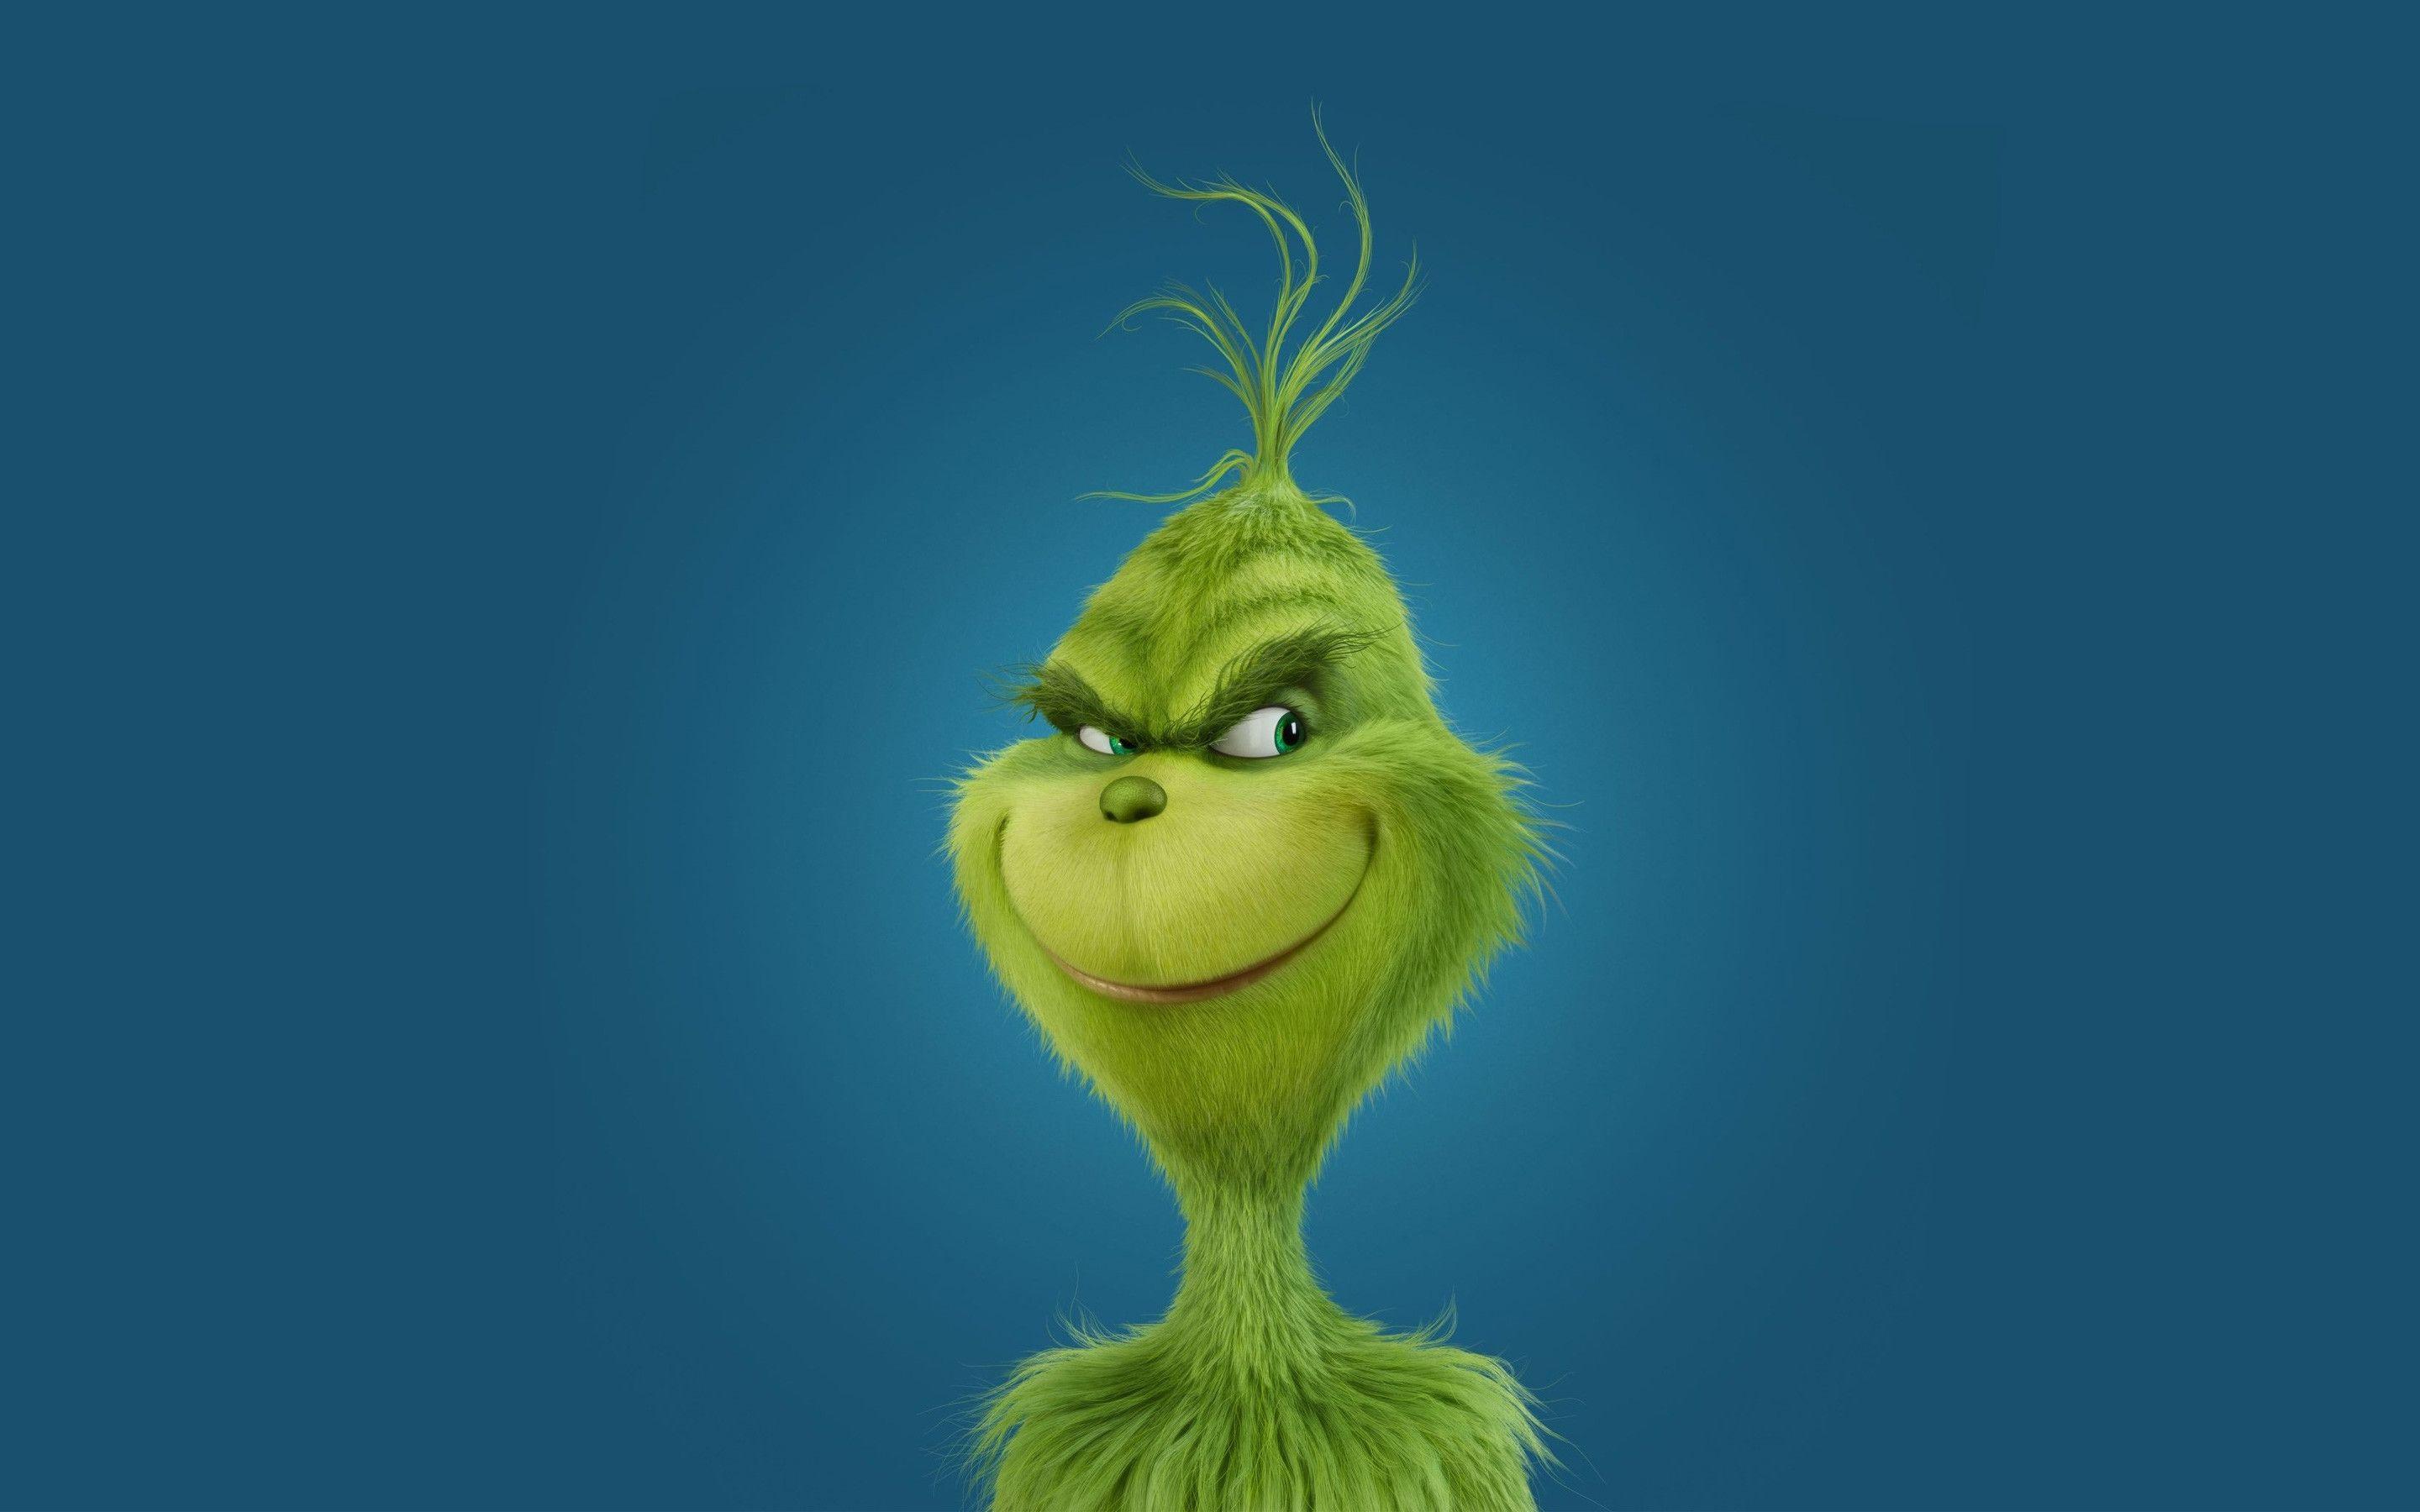 Grinch Wallpapers Top Free Grinch Backgrounds Wallpaperaccess The best collection of tv shows wallpapers for your desktop and phone devices. grinch wallpapers top free grinch